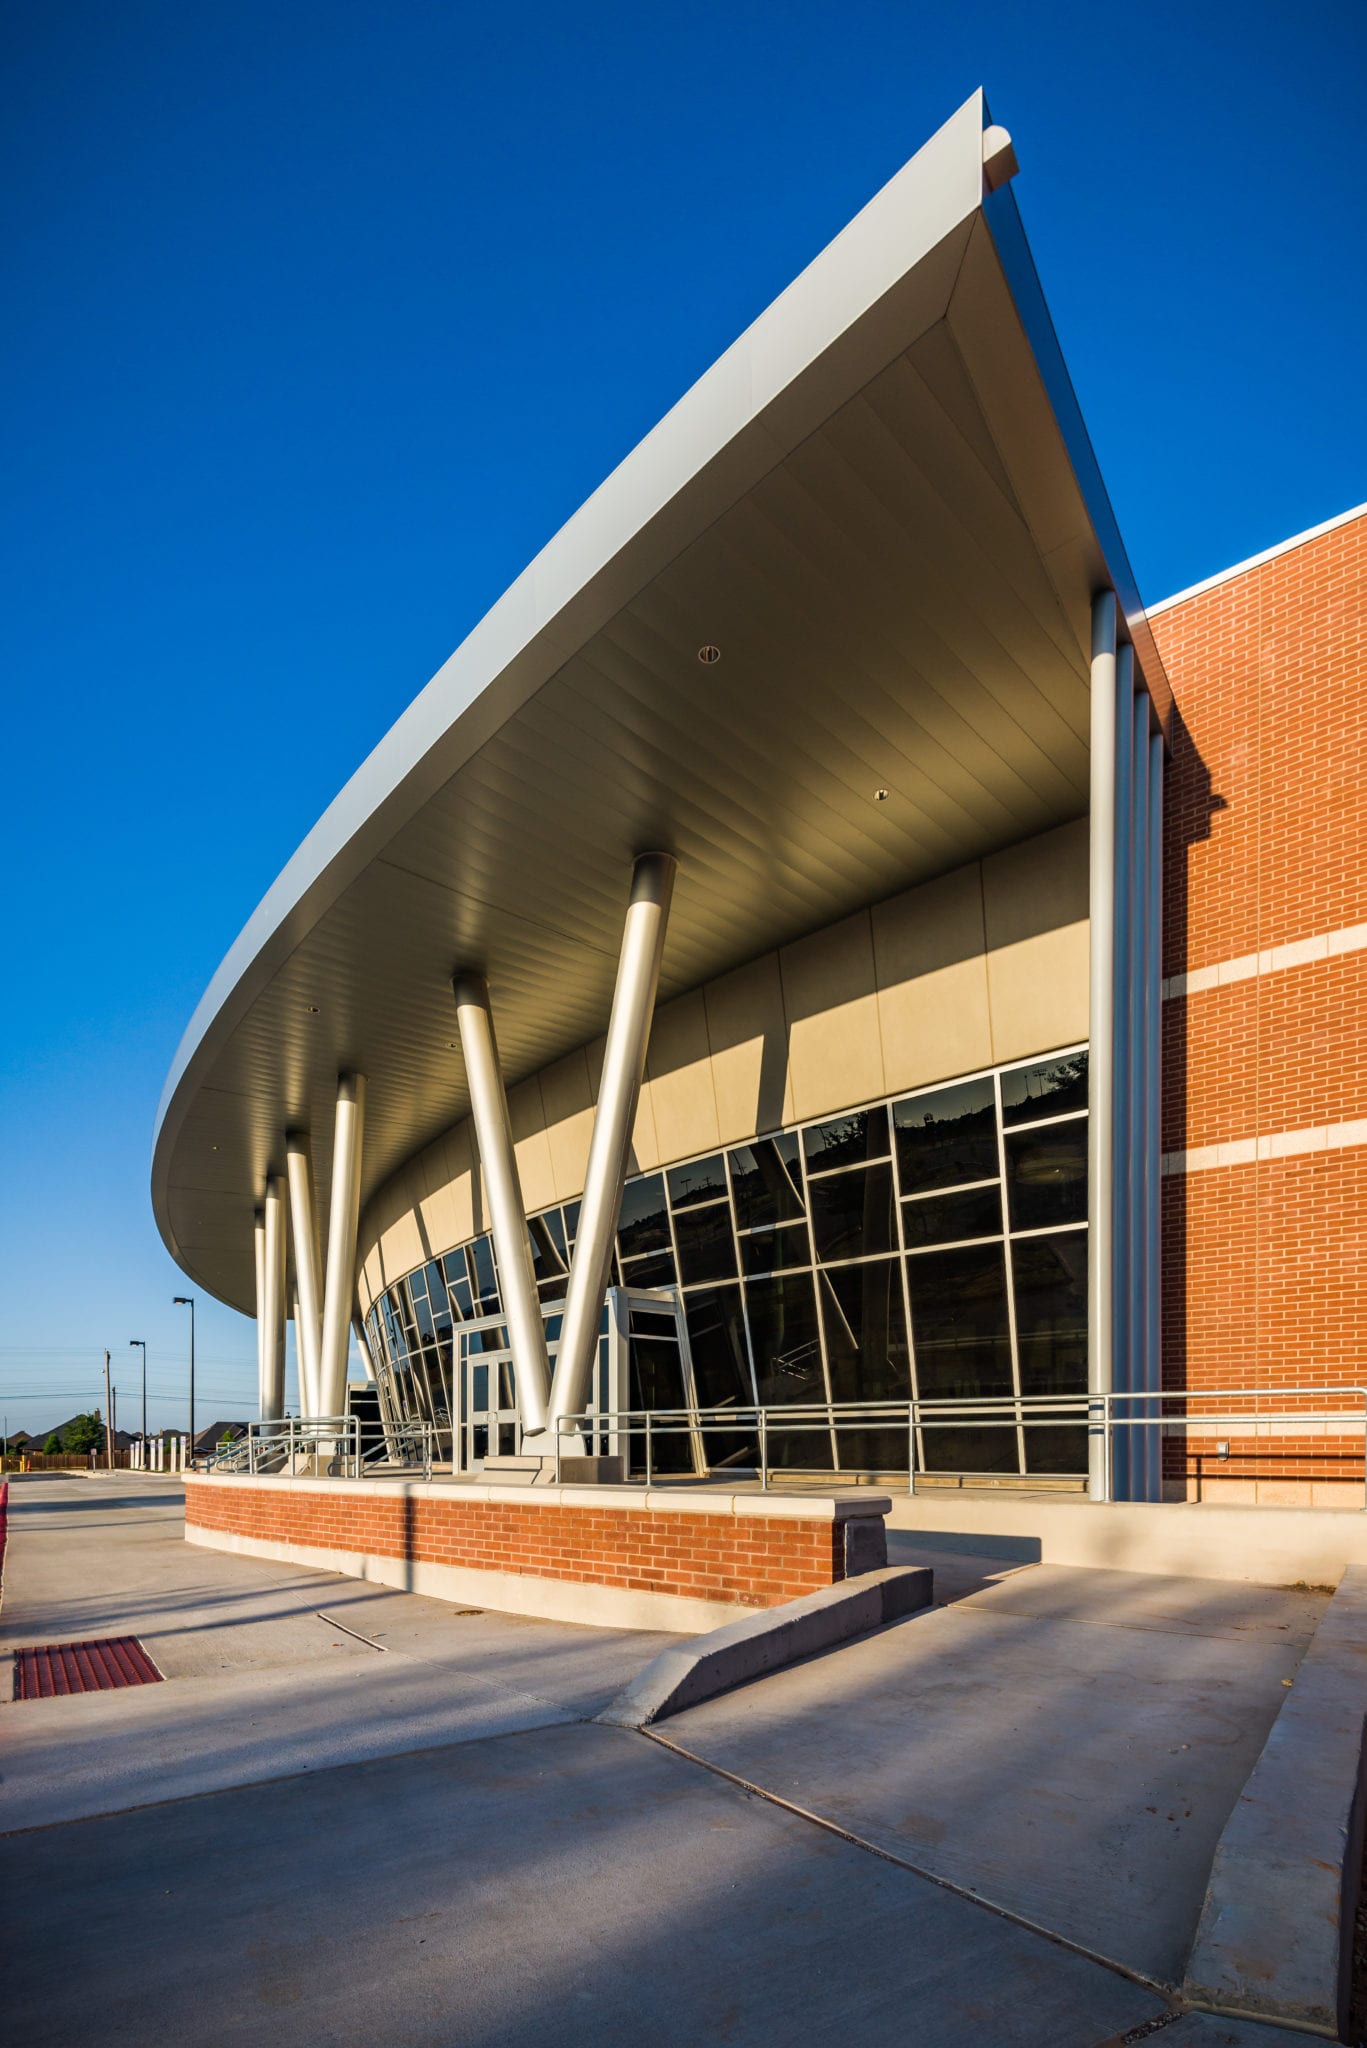 Wylie Performing Arts Center built by RHS Contraction Services in Abilene, Texas